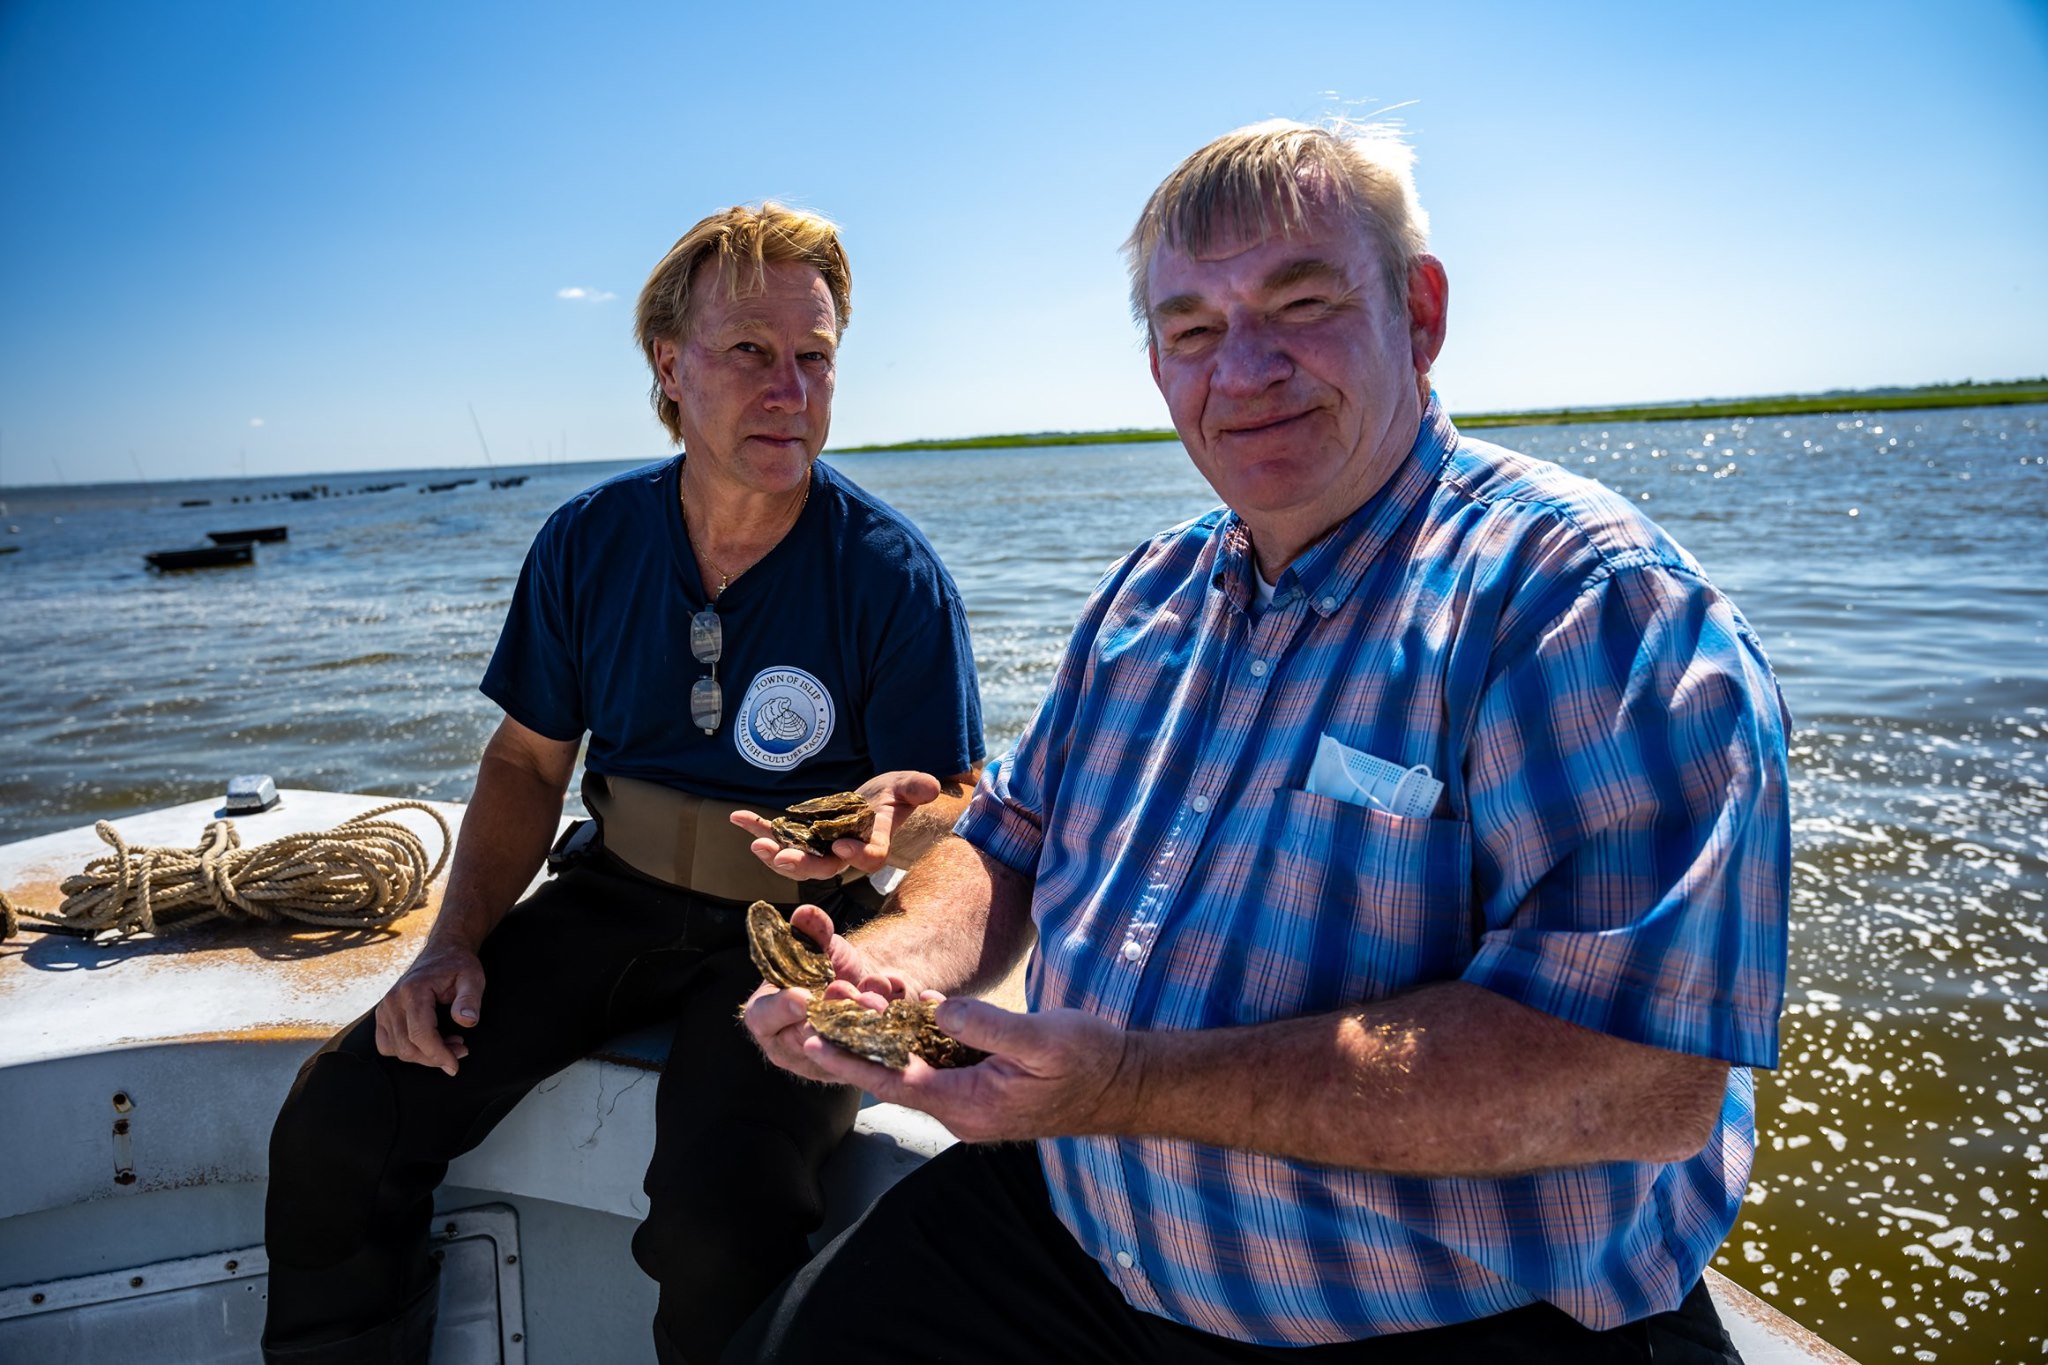 DEC Commissioner Bellew and worker sit on deck with oysters